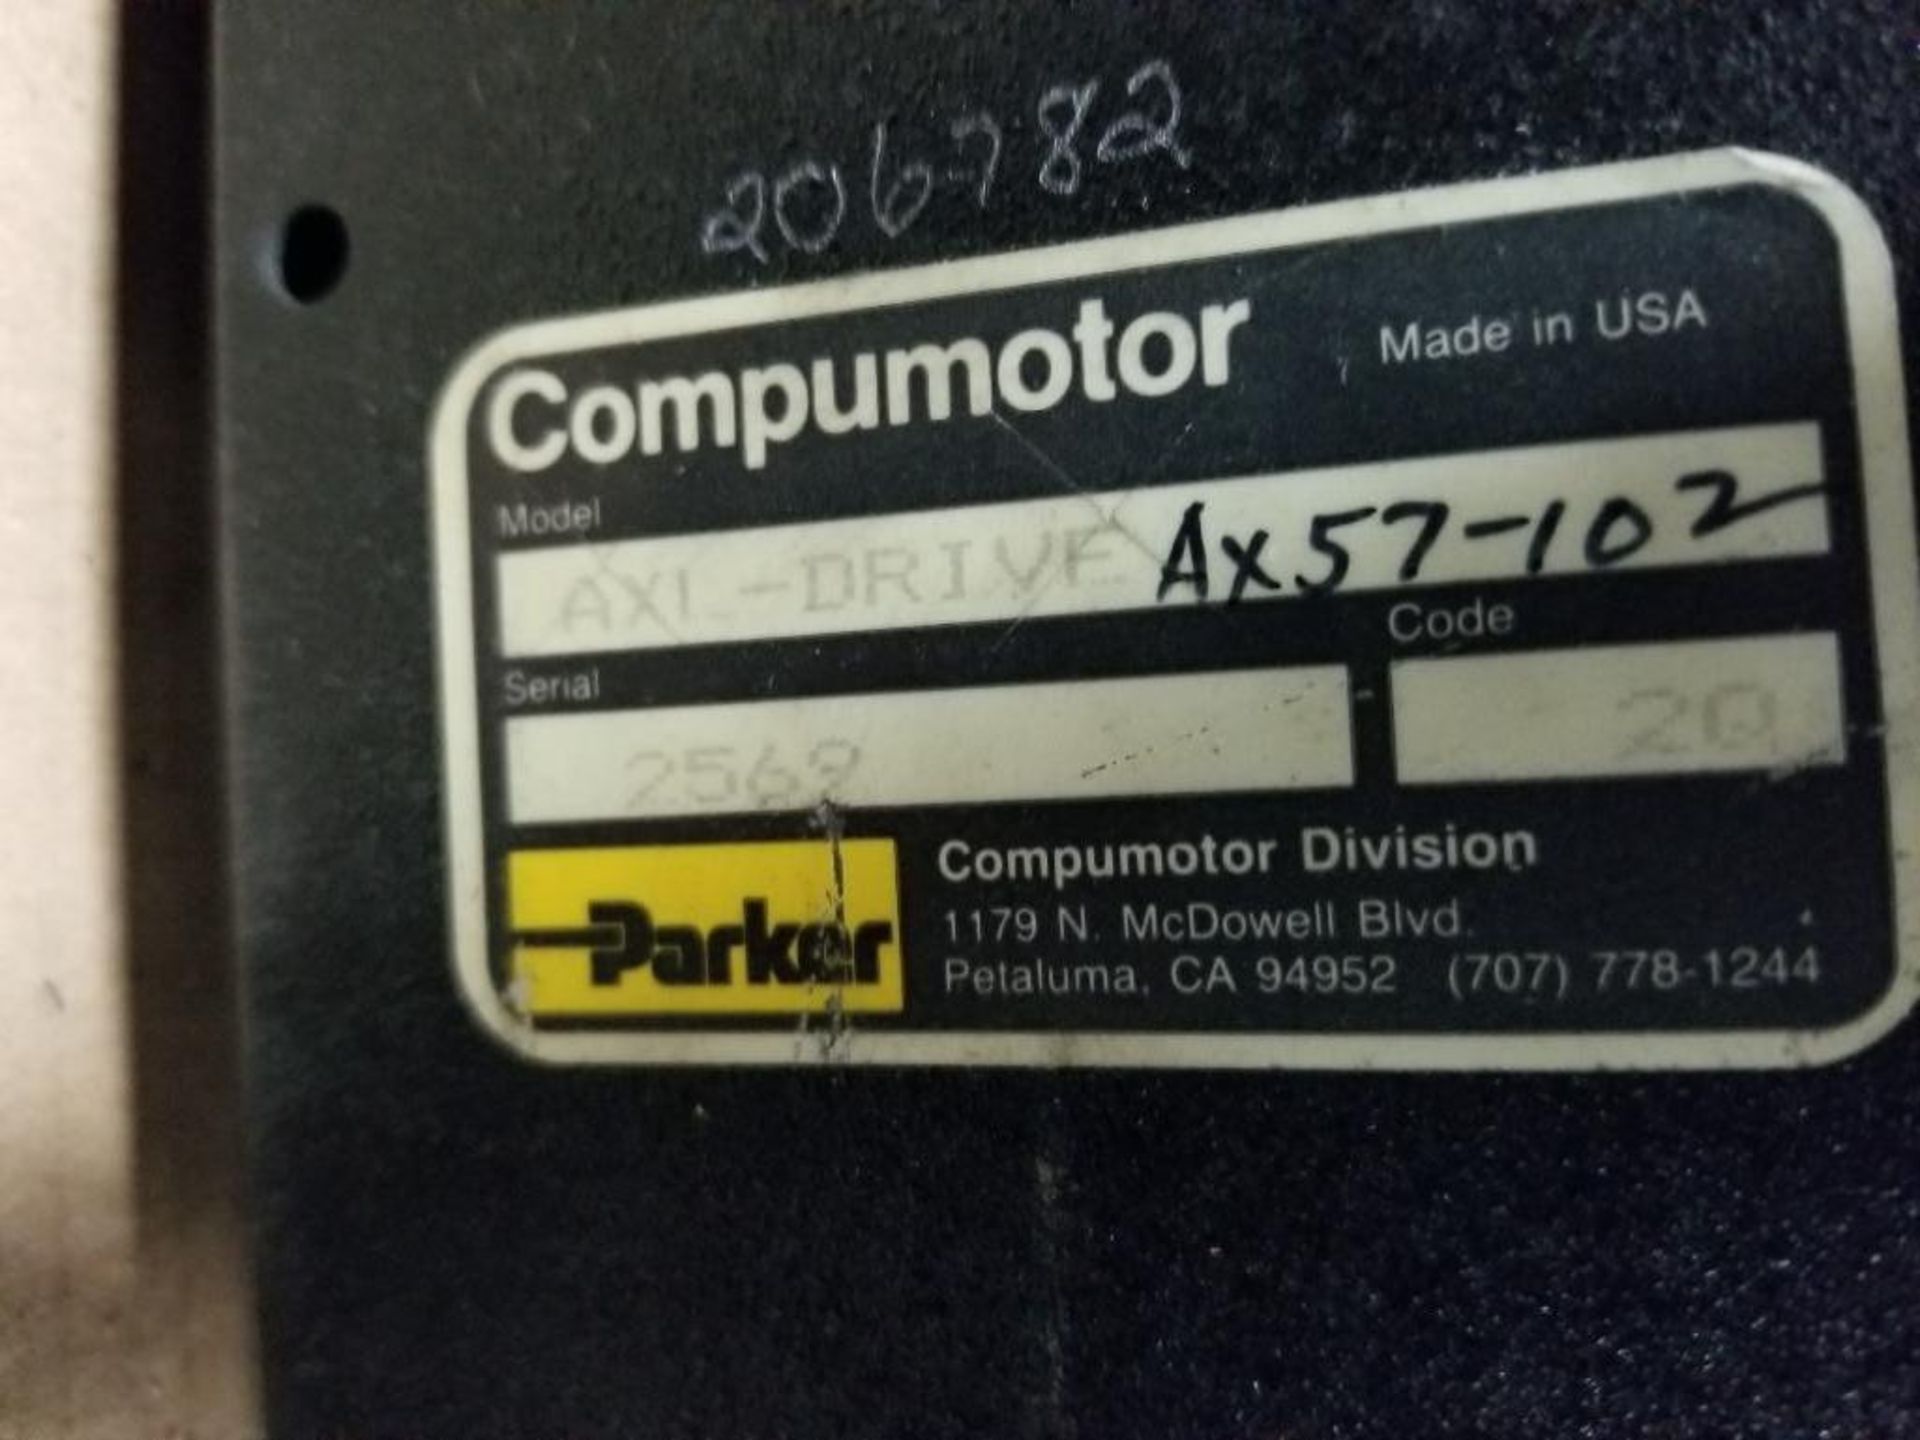 Qty 3 - Assorted Parker Compumotor AXL-Drive. - Image 7 of 7